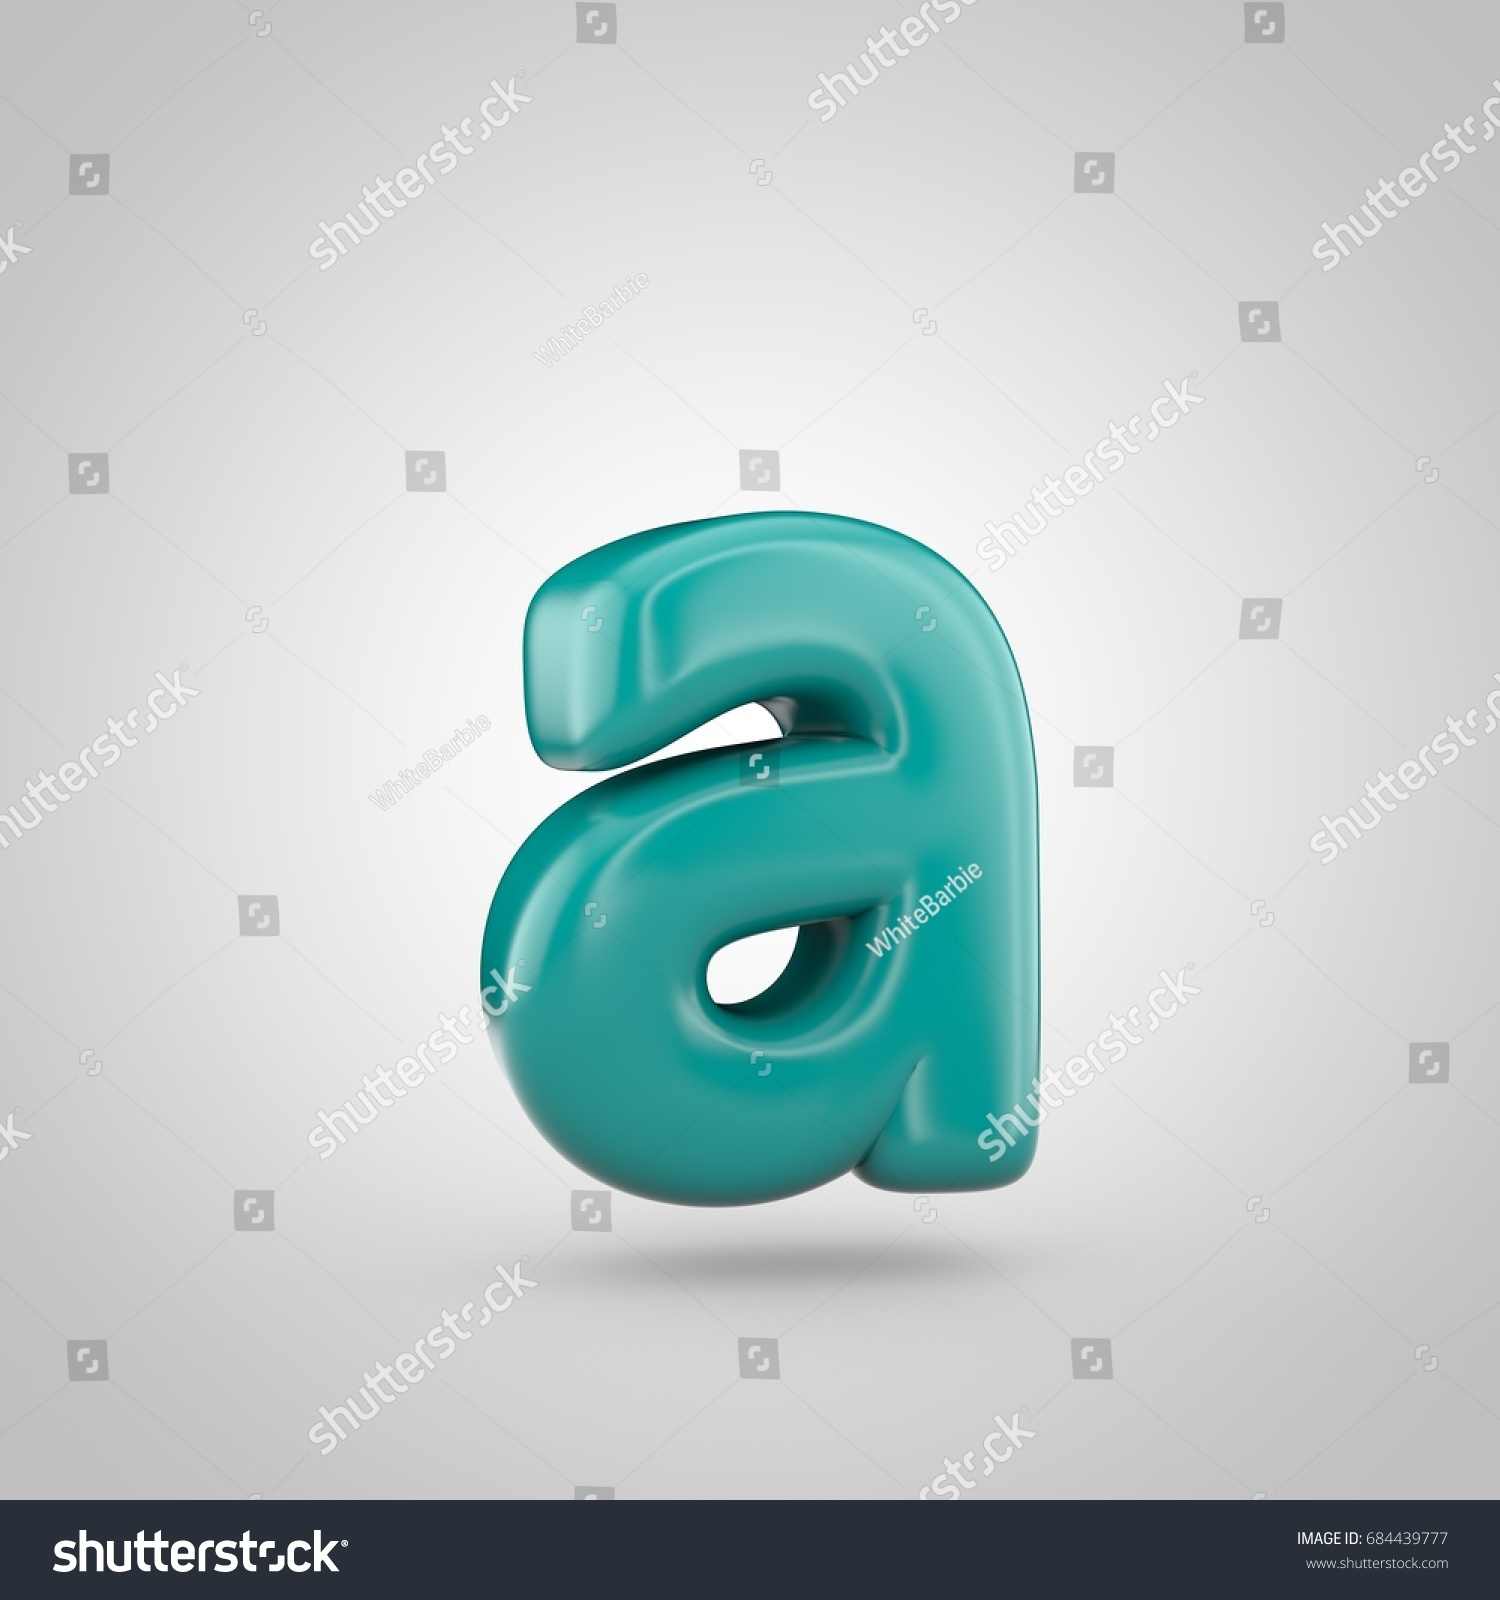 Royalty Free Stock Illustration Of Glossy Marrs Green Color Alphabet